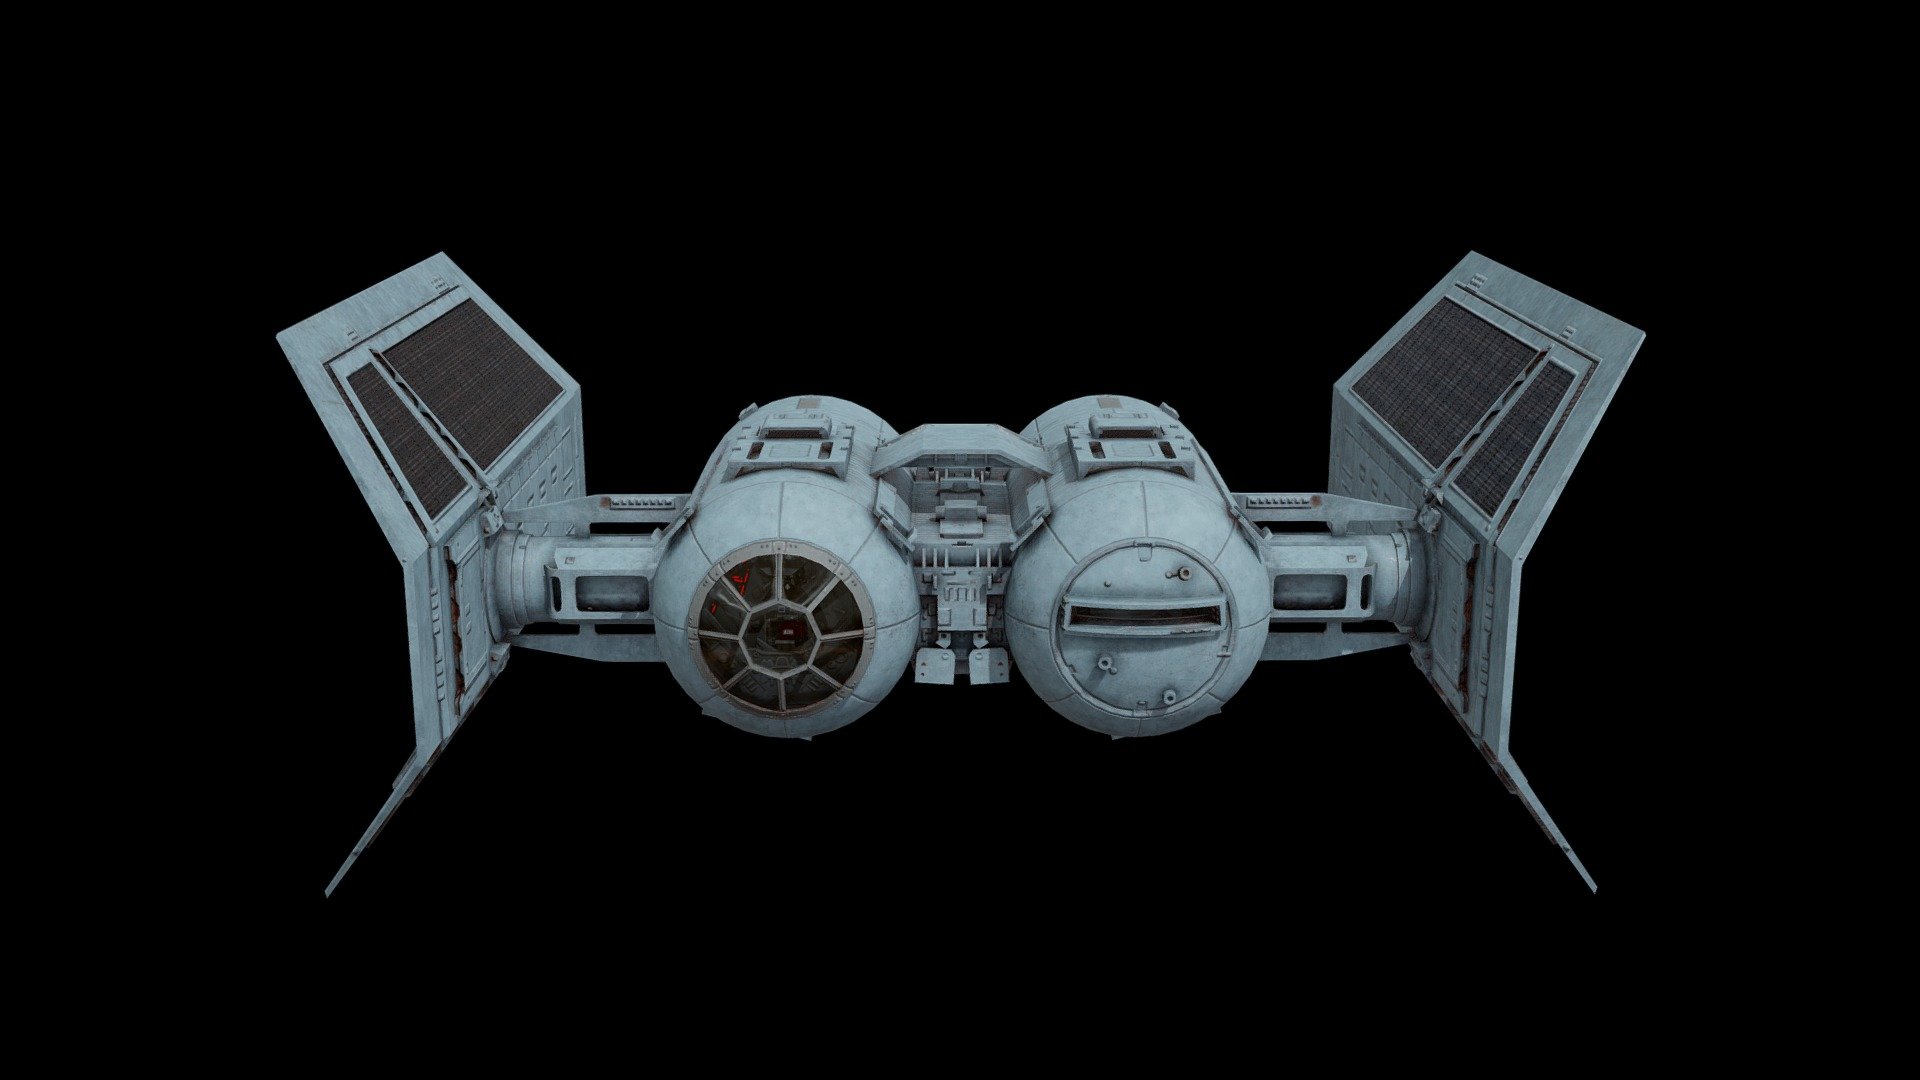 This model is of a little-known ship from Empire Strikes Back, a tiny distant TIE shuttle that looks like a bomber with inverted wings, which Captain Needa uses to apologize to Vader in person. This model is mostly based on Jason Eaton's rendition of the ship in the &lsquo;TIE Fighter Owner's Manual,' but with some personal tweaks such as new engines and a thin viewport into the passenger compartment. A larger transport TIE, the TIE Boarding Craft can be seen in Rogue One and Andor, this guy's not the most spacious! Quite a bit more detailed than my TIE fighter.

4 sets of textures- one for the wings, for the body, for the interior, and for the pilot. The interior and TIE pilot textures are the same as the ones in my regular TIE fighter model. If Sketchfab supported UDIMs, everything could be in 1 material using multiple UV tiles, but for now, it's 5 separate materials (one more to be able to dial in the glass transparency, even though it uses the body textures.) Hope to see more of this ship officially someday! - Star Wars TIE Shuttle (Needa's Shuttle from ESB) - Buy Royalty Free 3D model by Robear (@xiaorobear) 3d model